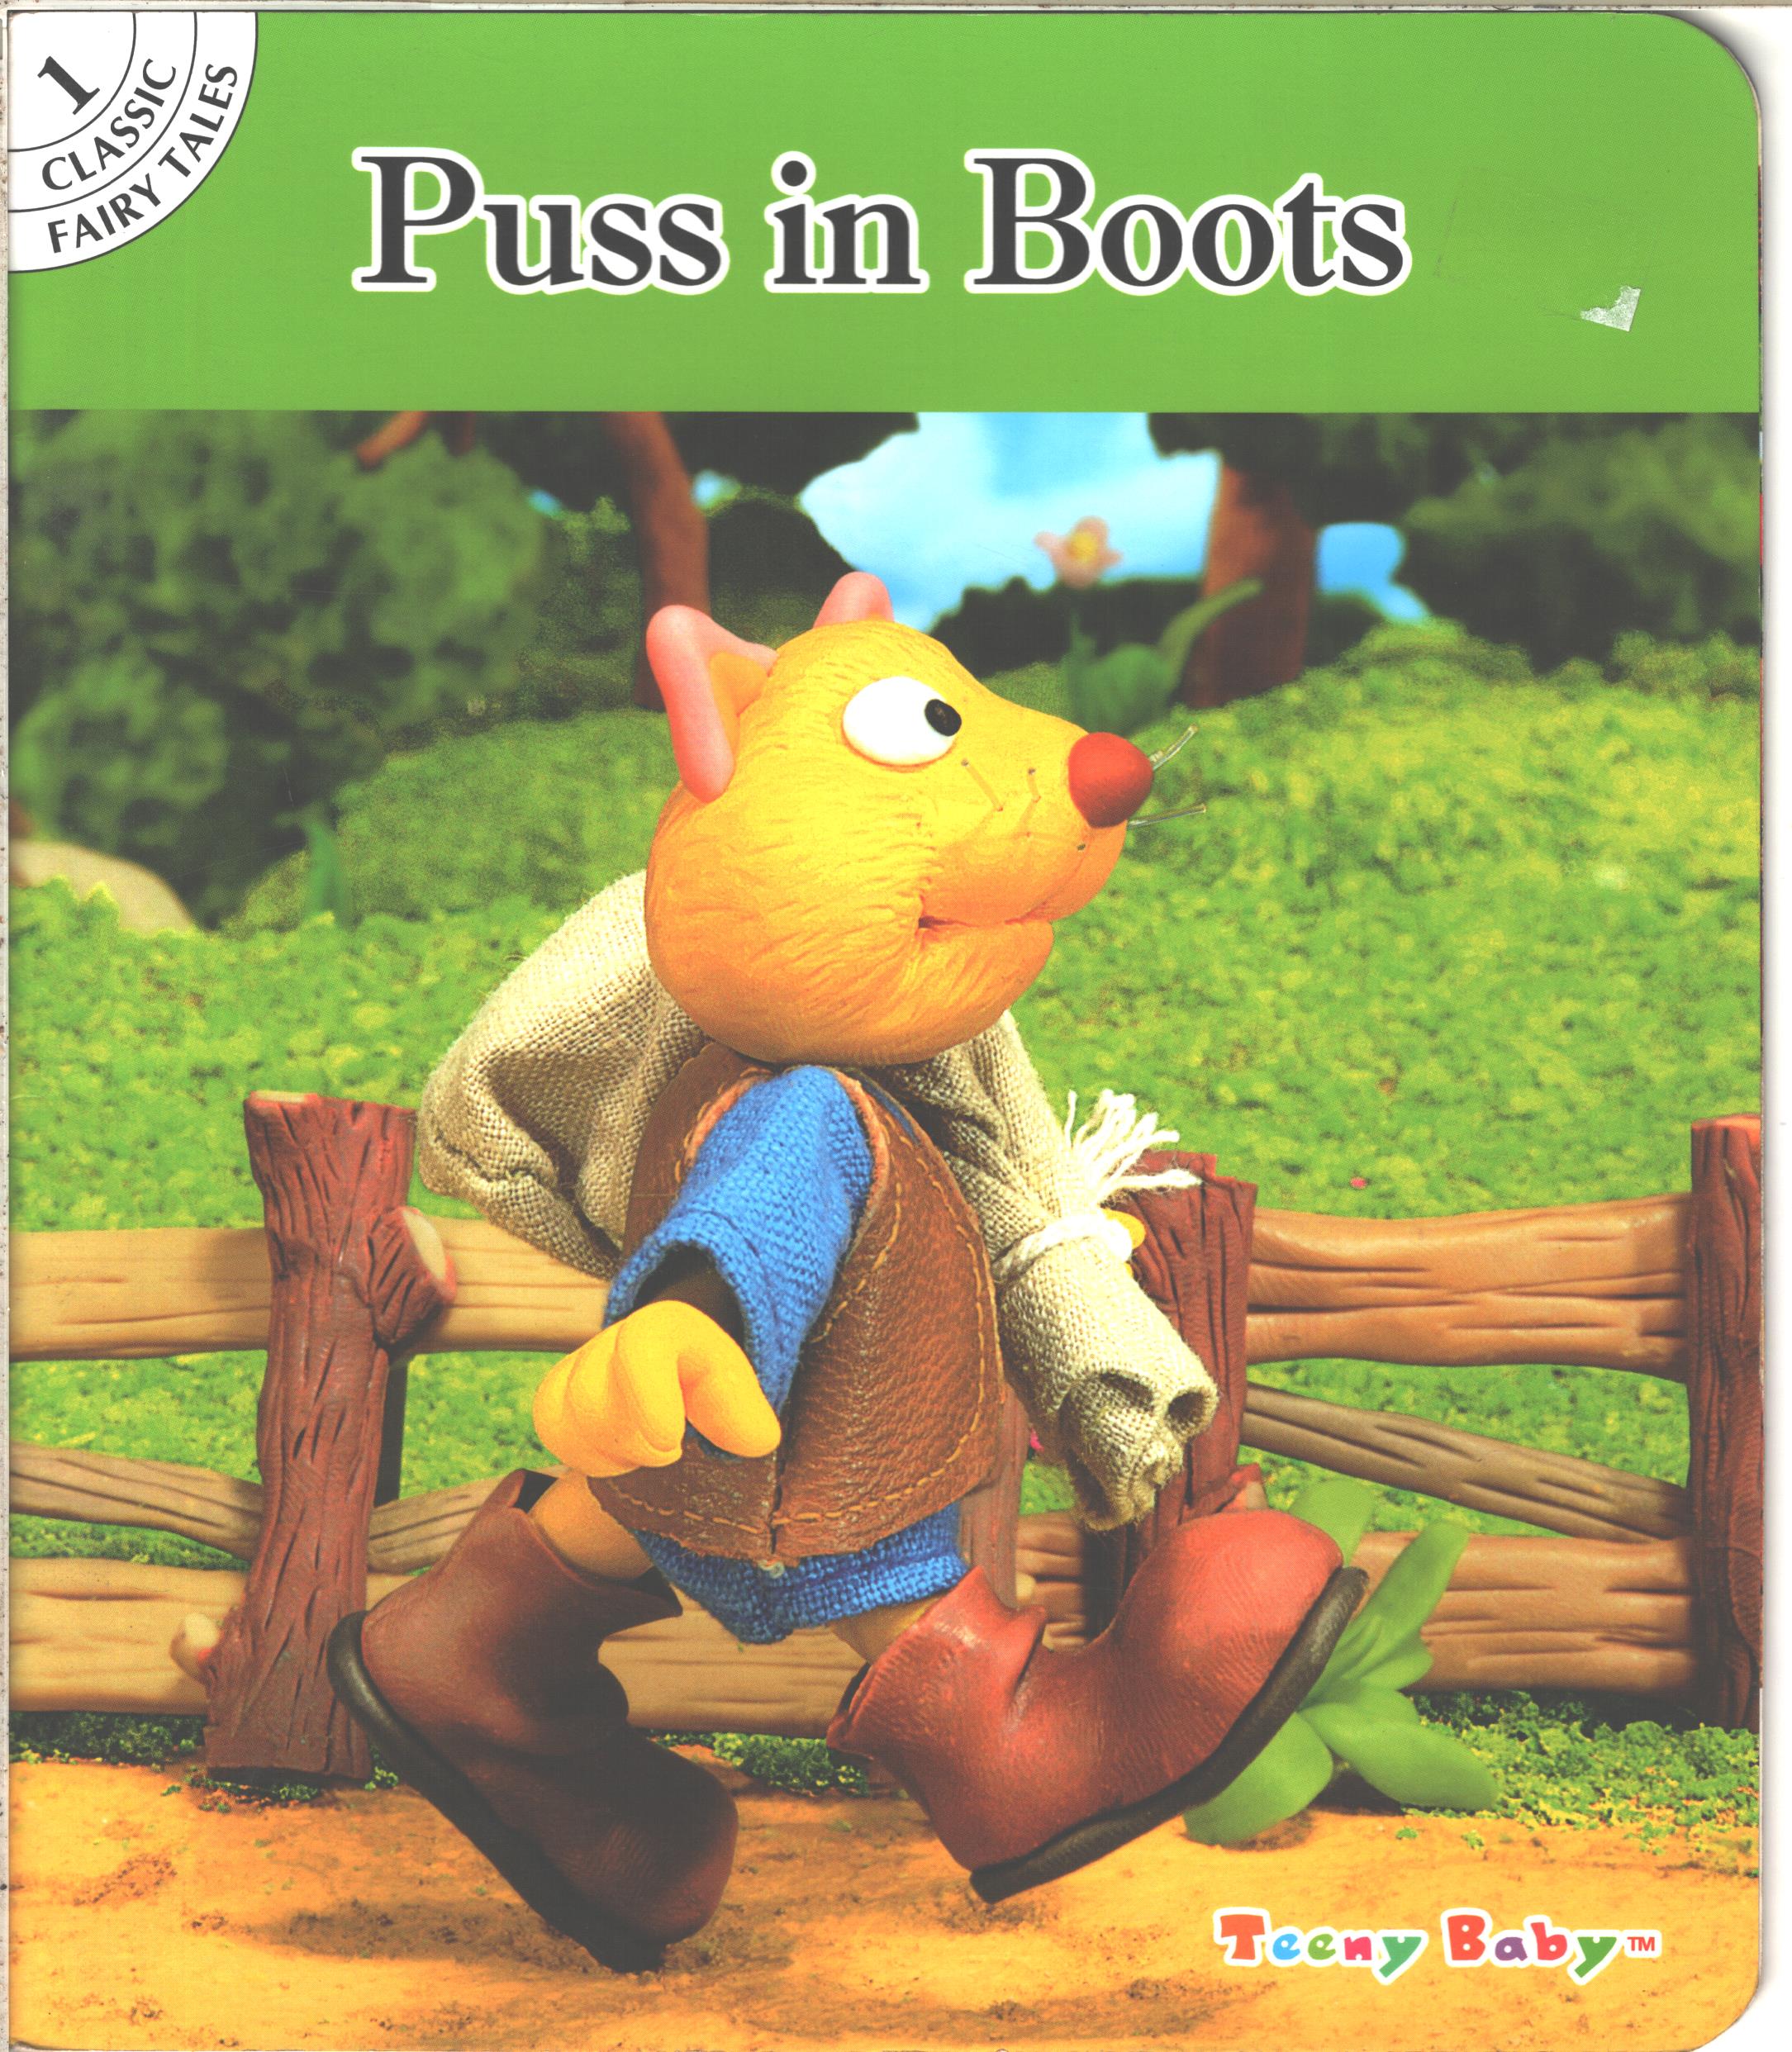 Puss in Boots (Classic fairy tales)